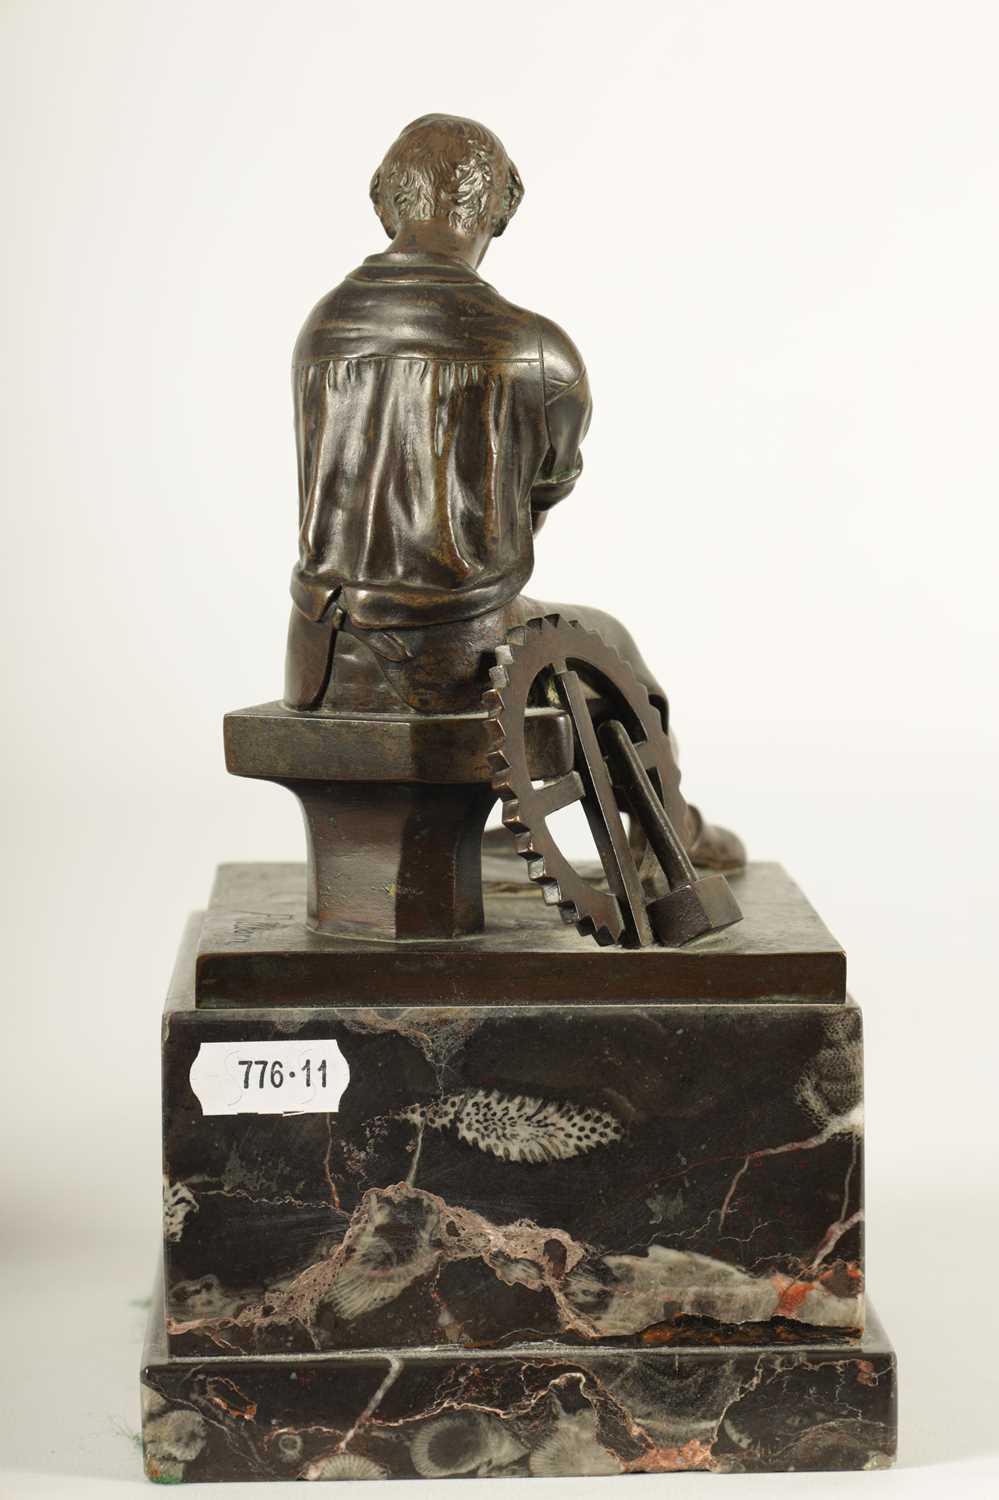 AN EARLY 20TH CENTURY FIGURAL BRONZE SCULPTURE OF AN INDUSTRIALIST - Image 8 of 11